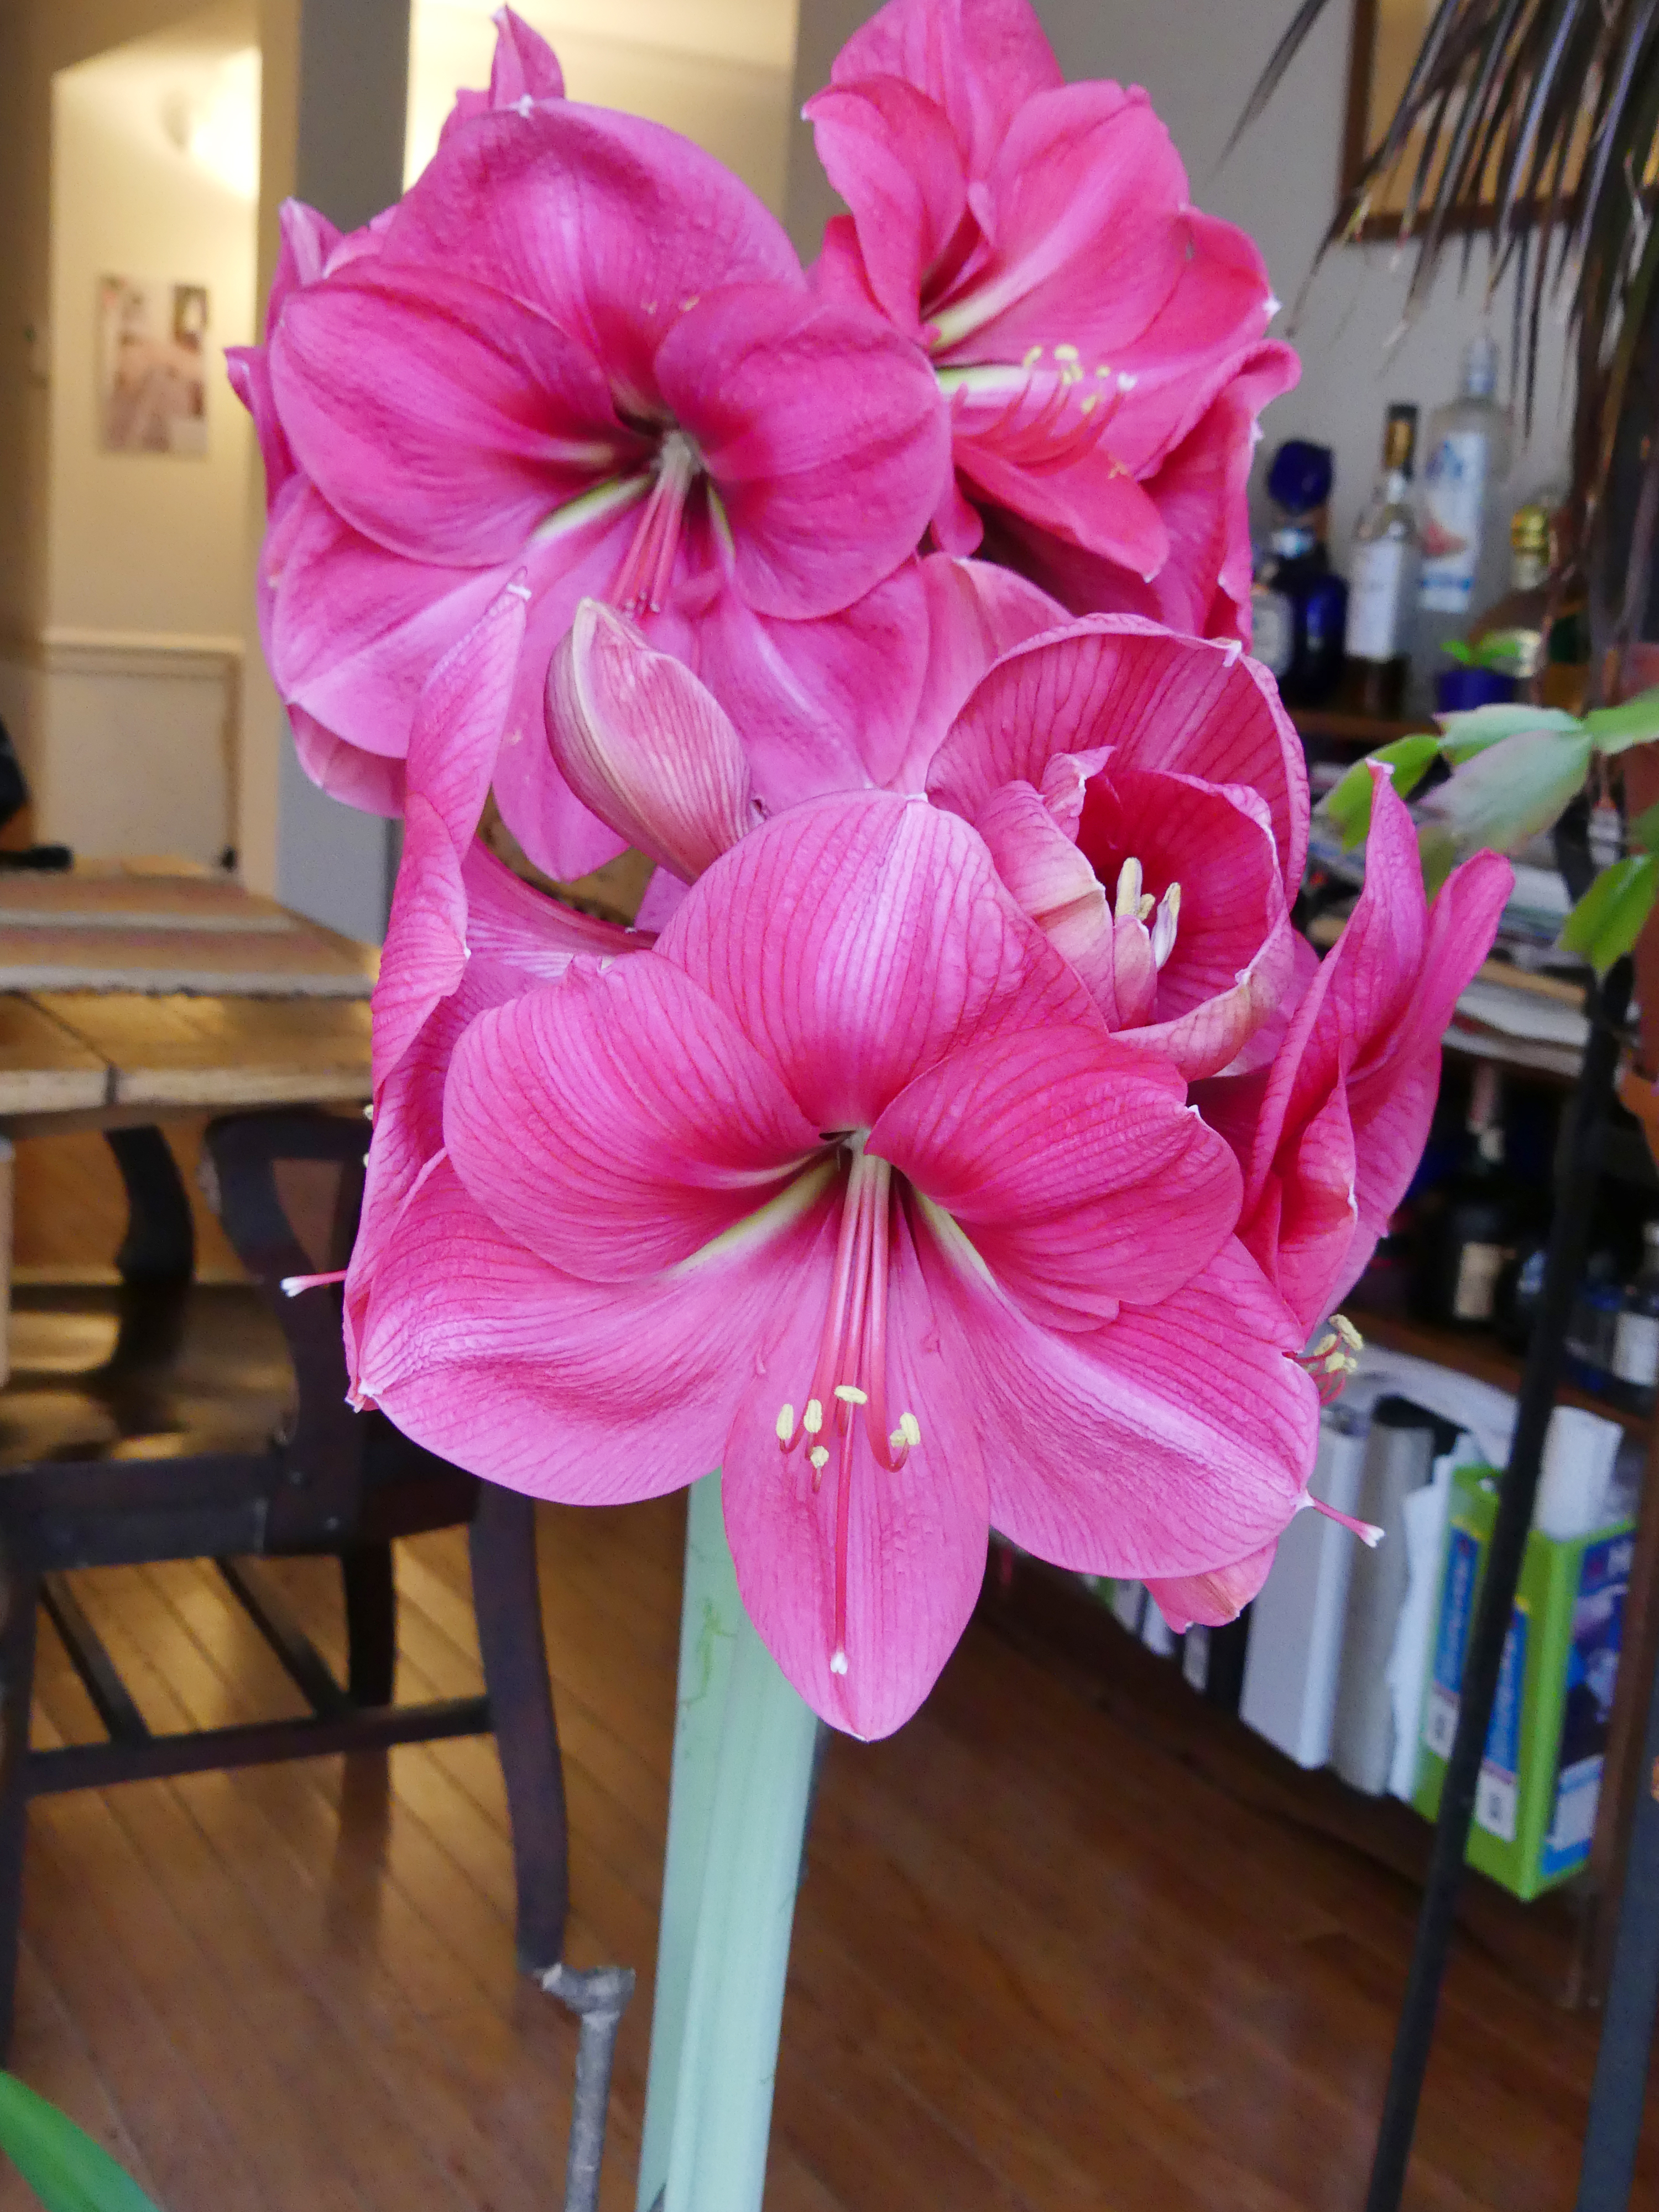 This standard single Amaryllis has eight flowers on two stalks. The sticky yellow pollen can easily be removed by cutting the anthers off if the pollen causes a problem. This plant was timed to bloom in March, but they can be ‘forced’ throughout the winter if they are kept dormant late into the fall or early winter. ANDREW MESSINGER